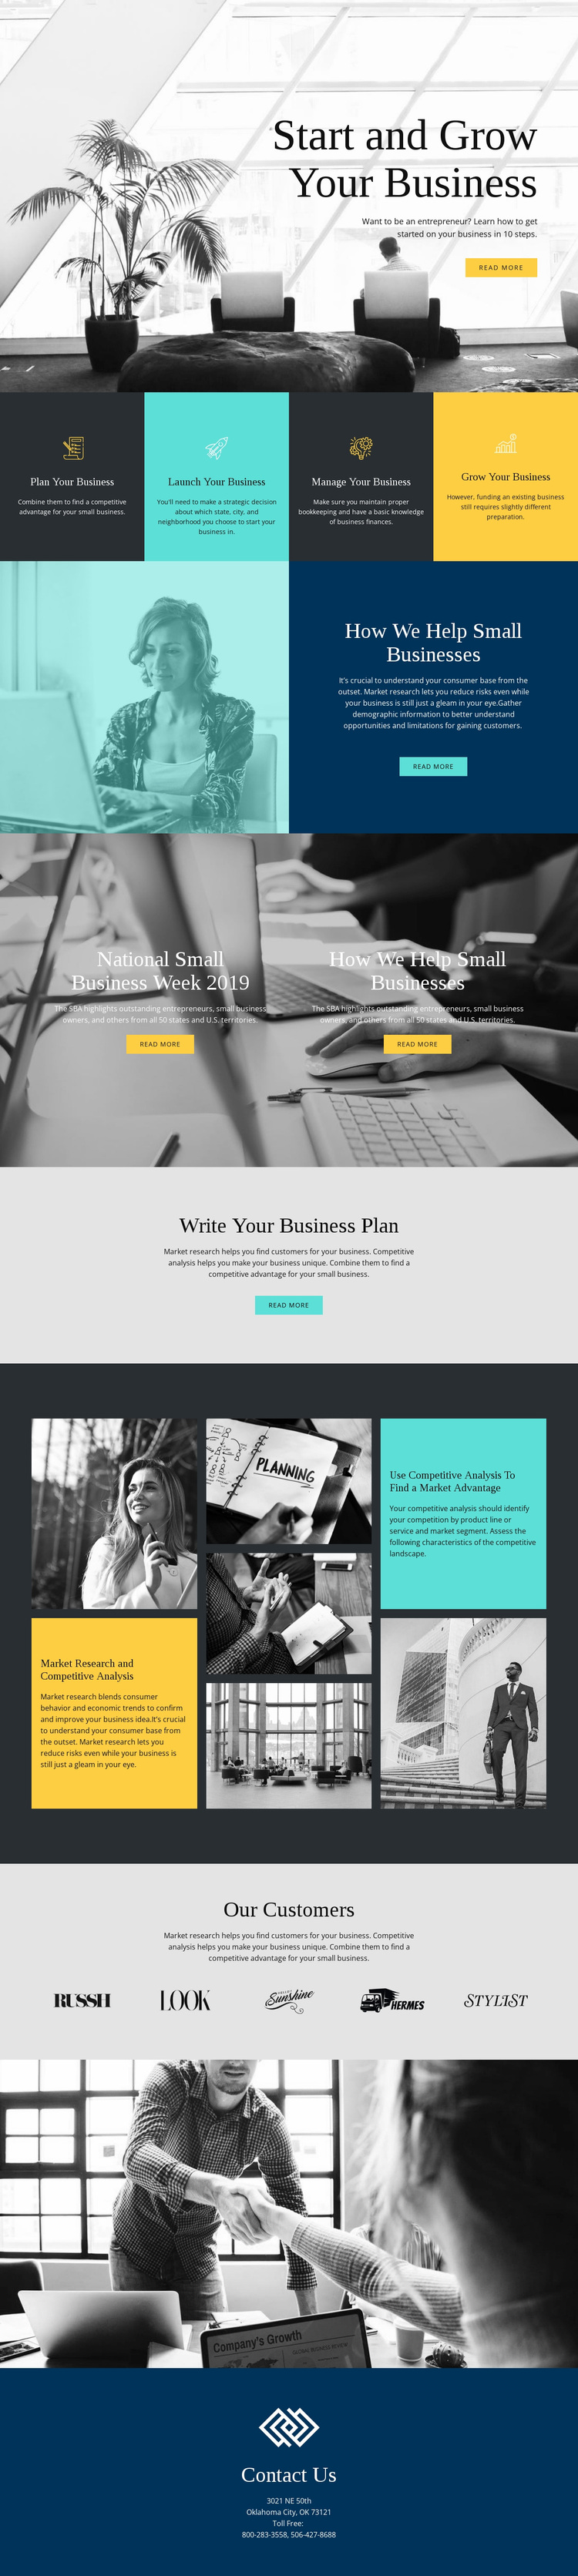 Start and grow your business Website Design